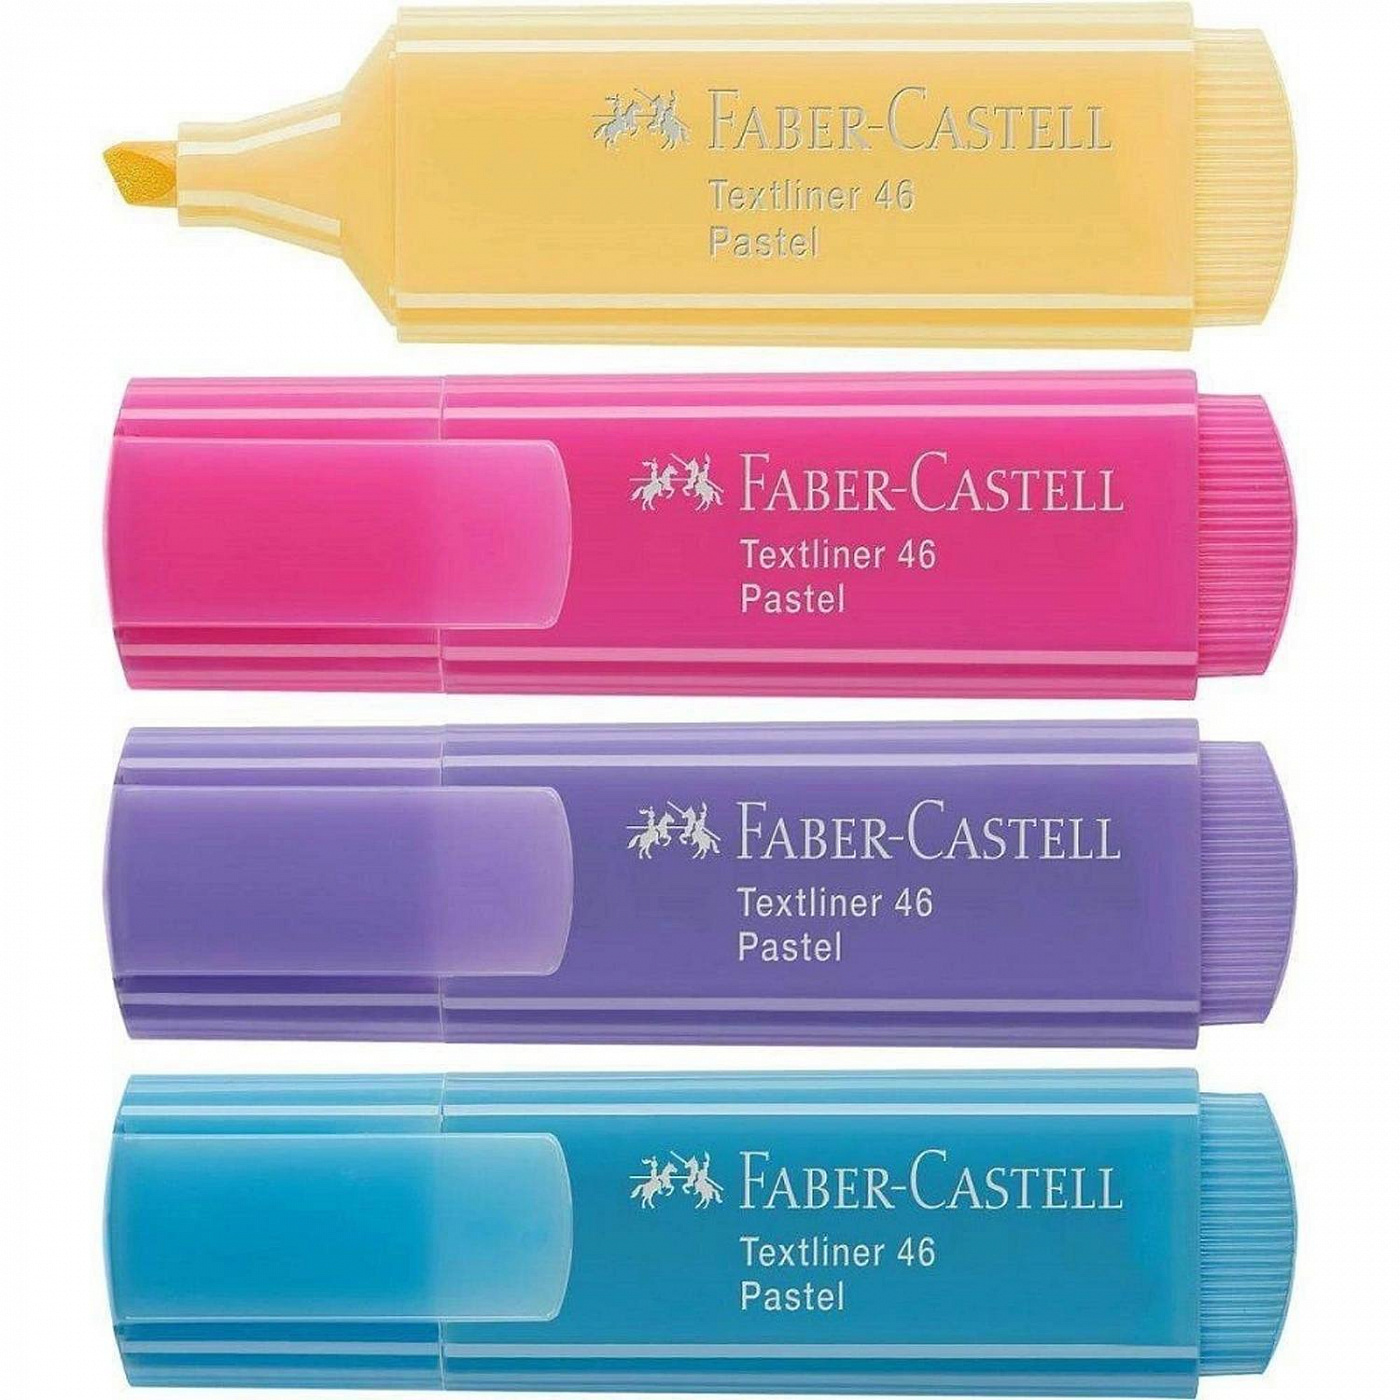  Faber-castell 46 Pastel , 1-5 